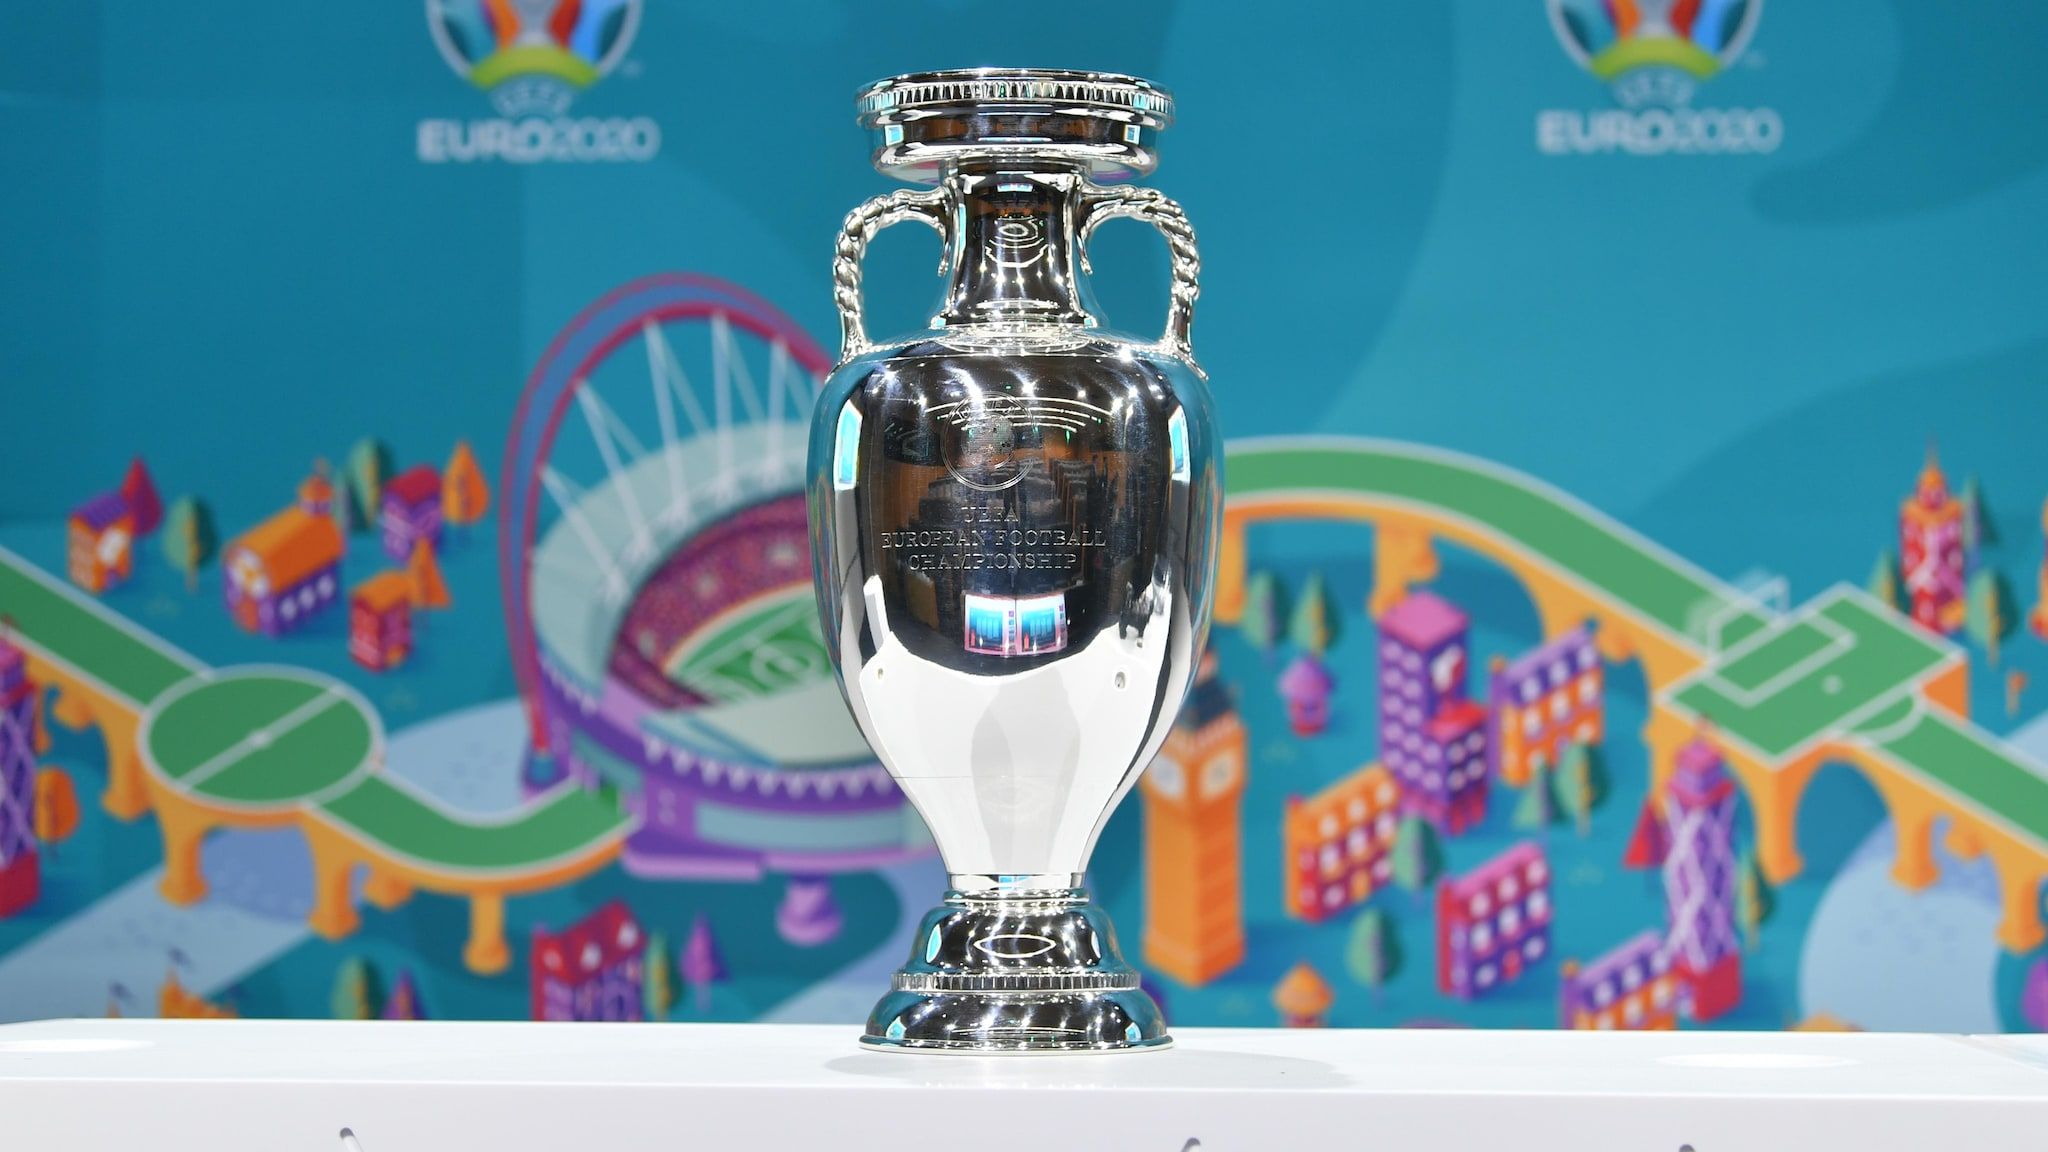 Change of venues for some UEFA EURO 2020 matches announced